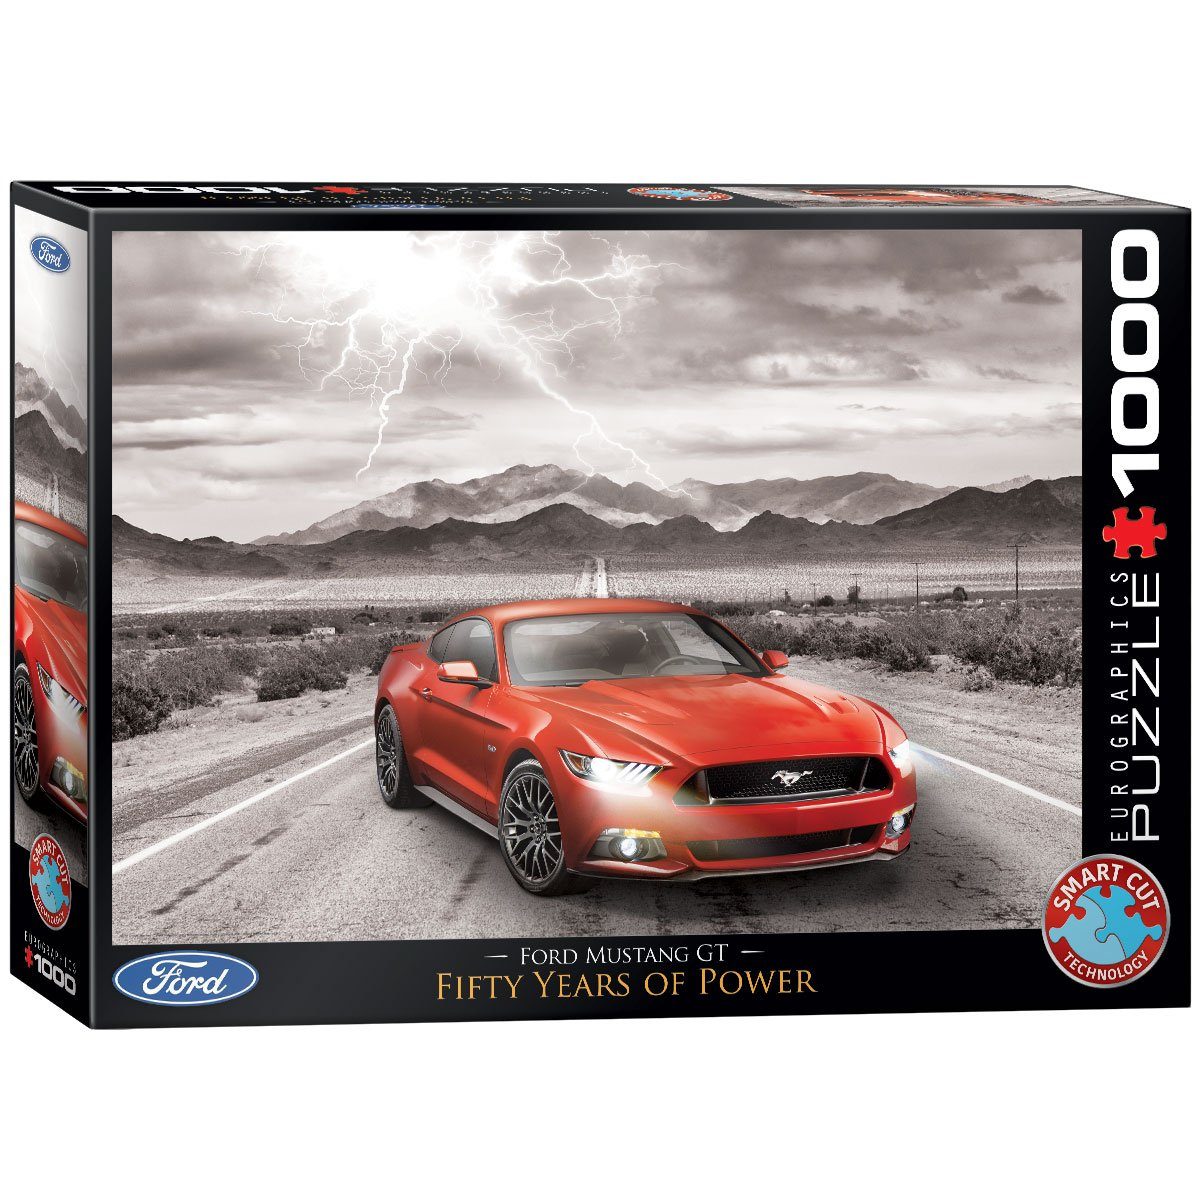 Eurographics Puzzle Puzzle, 1000 GT Mustang EUROGRAPHICS Ford 6000-0702 Puzzleteile